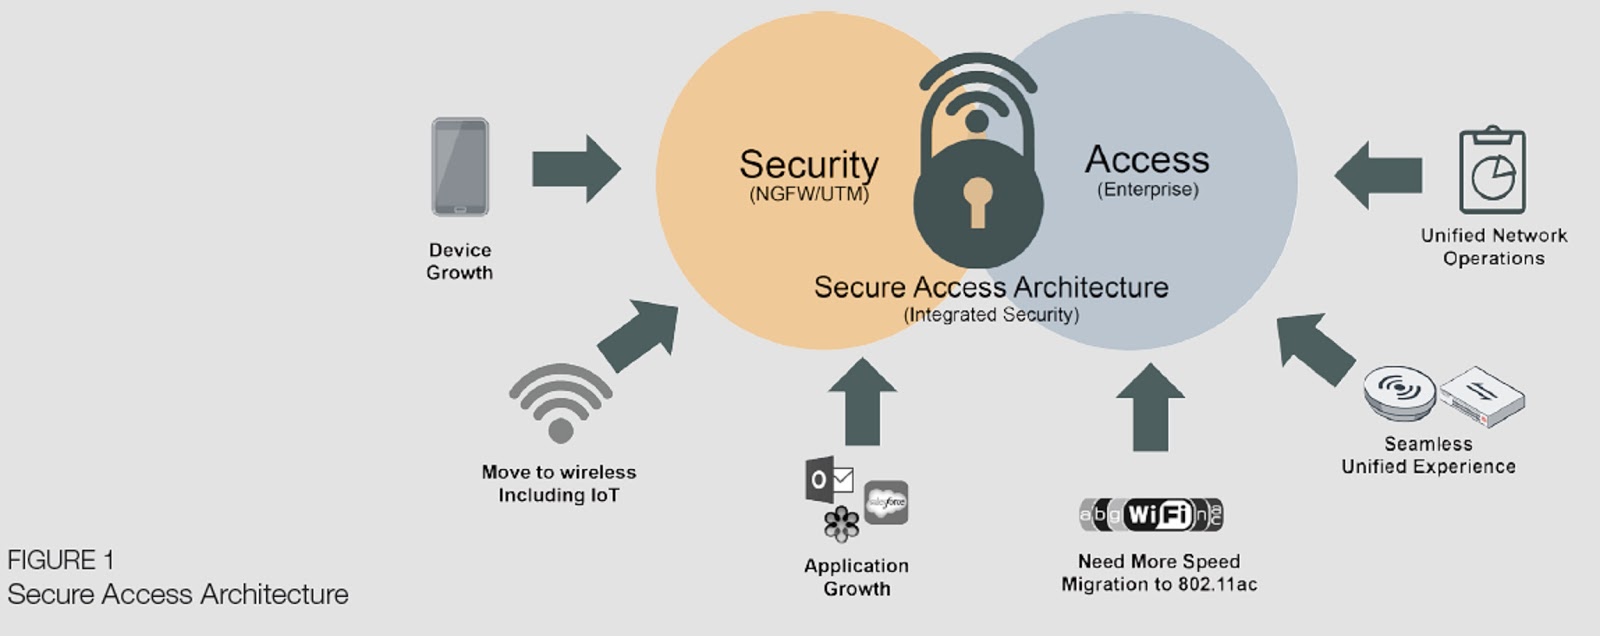 Https secure archiveofourown org. Network device Security. Applications of Network Security. Security in Wireless Networks. Secure access.